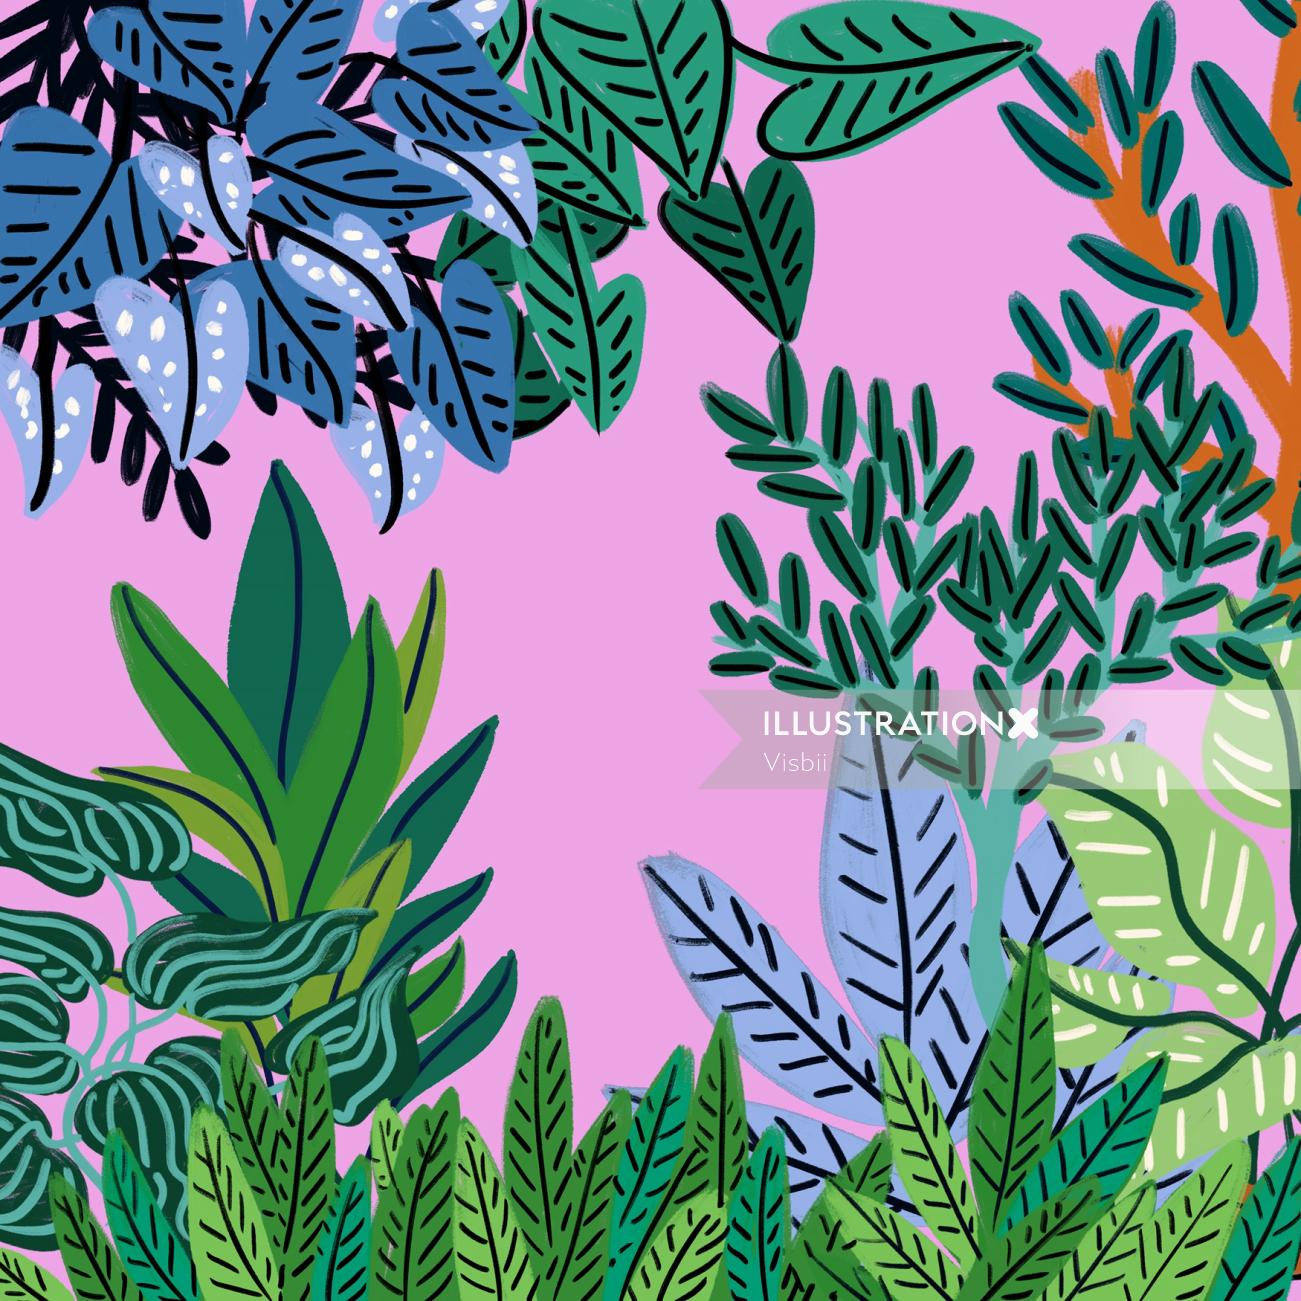 Abstract illustration of different plant leaves